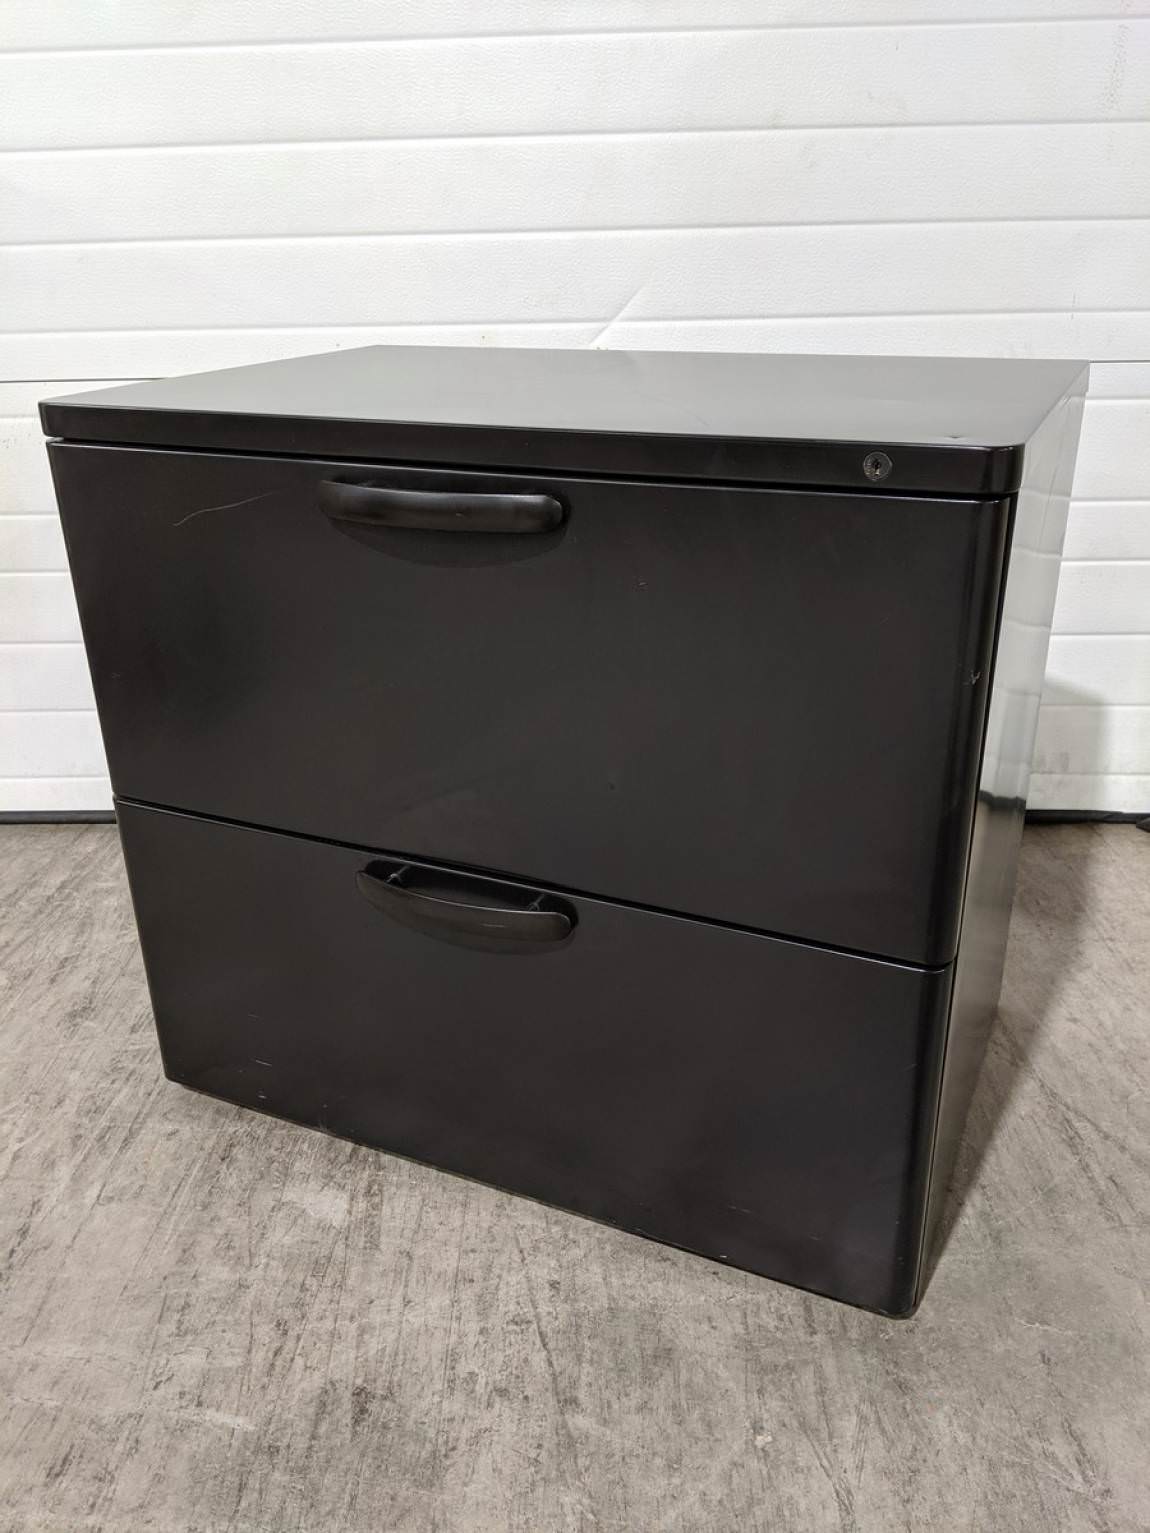 Black 2 Drawer Lateral Filing Cabinet – 29.5 Inch Wide